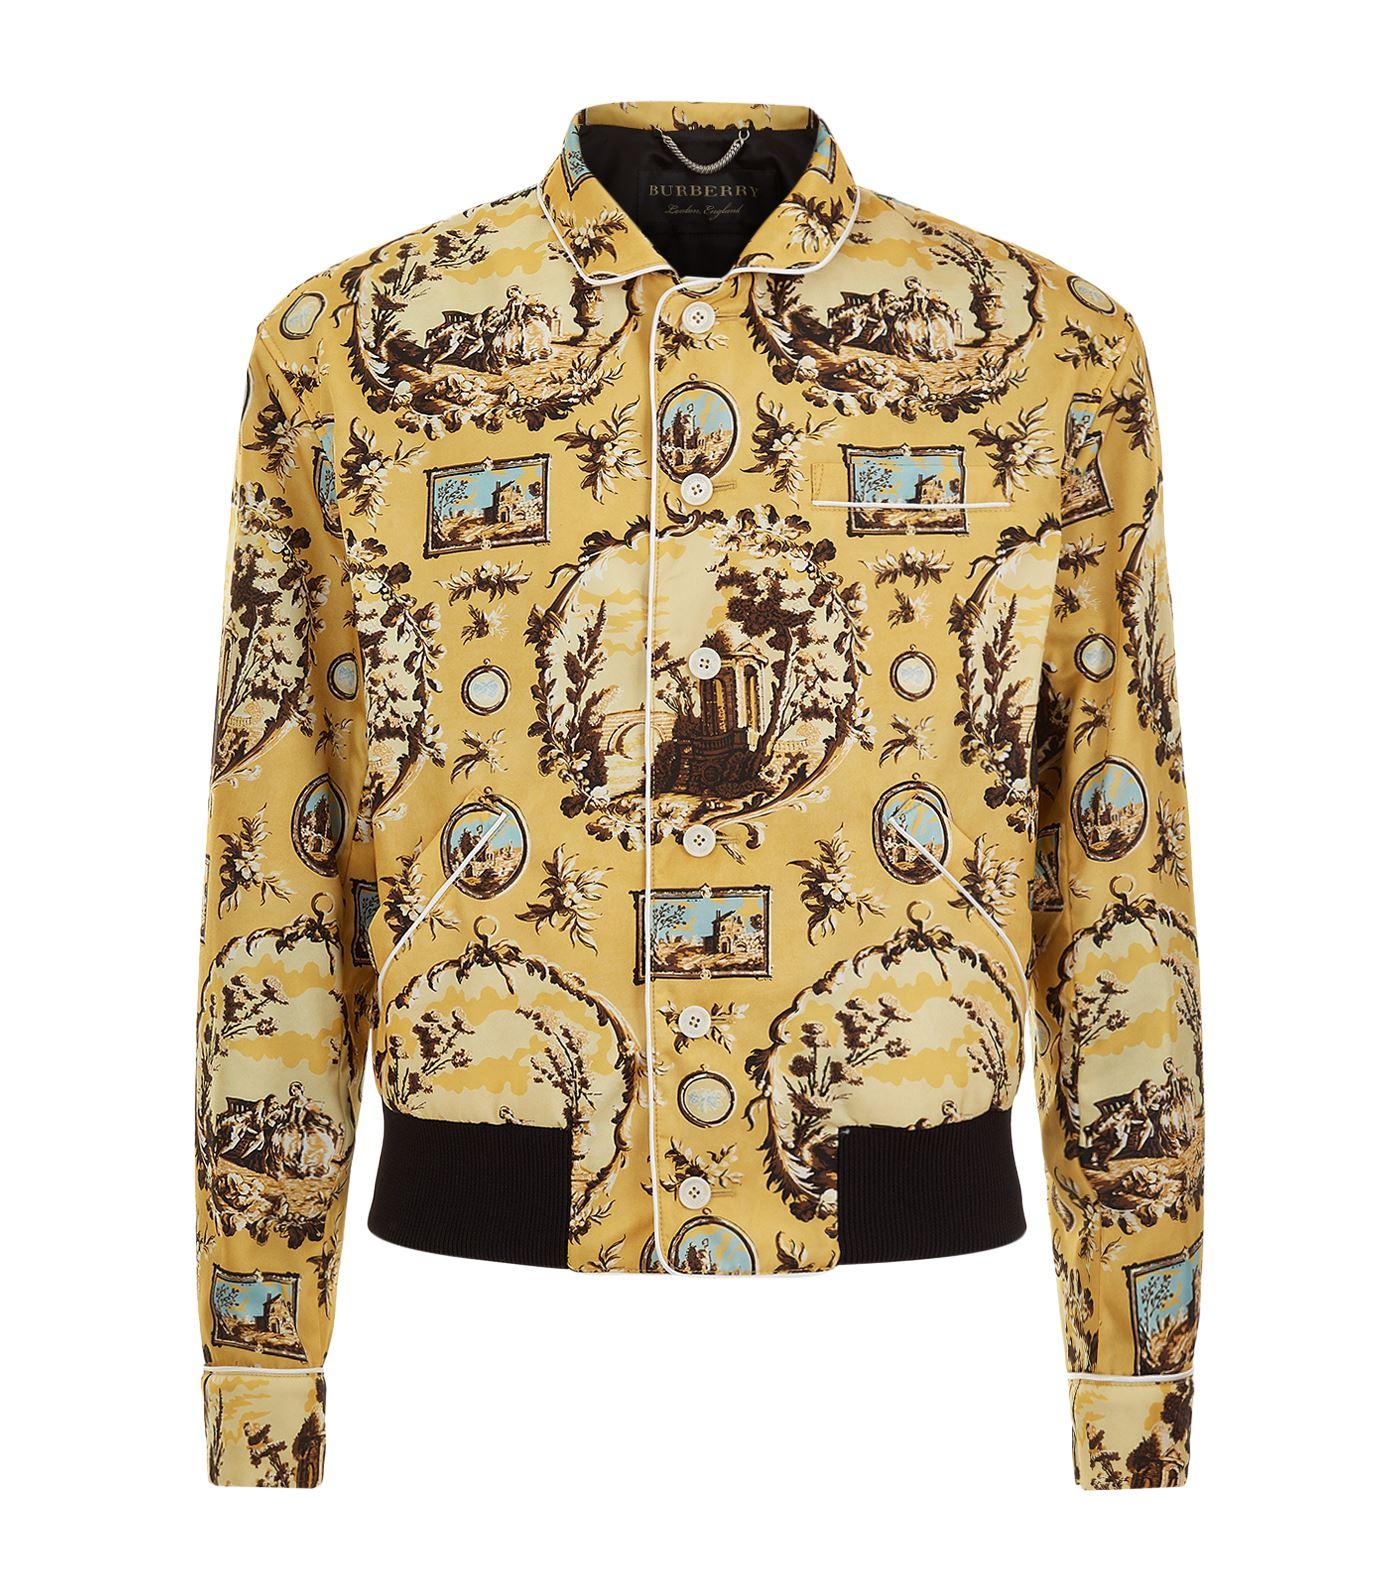 Burberry Synthetic Wallpaper Print Blouson Jacket in Yellow for Men - Lyst